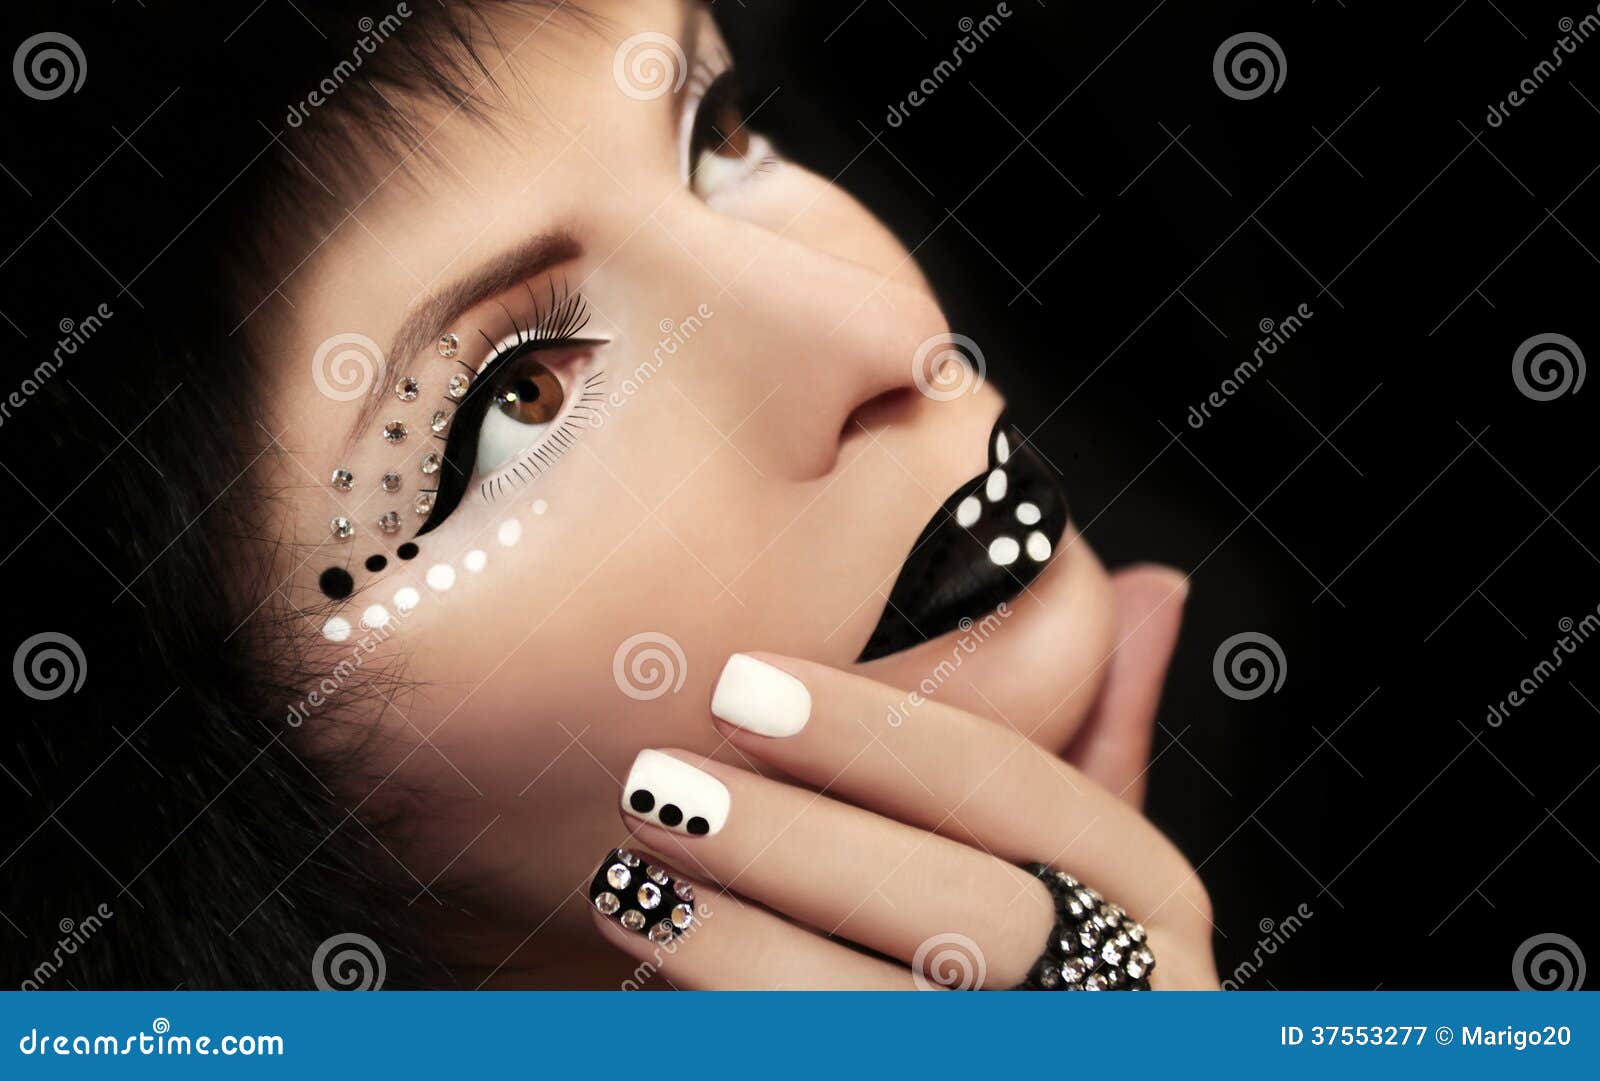 makeup and manicure with rhinestones.